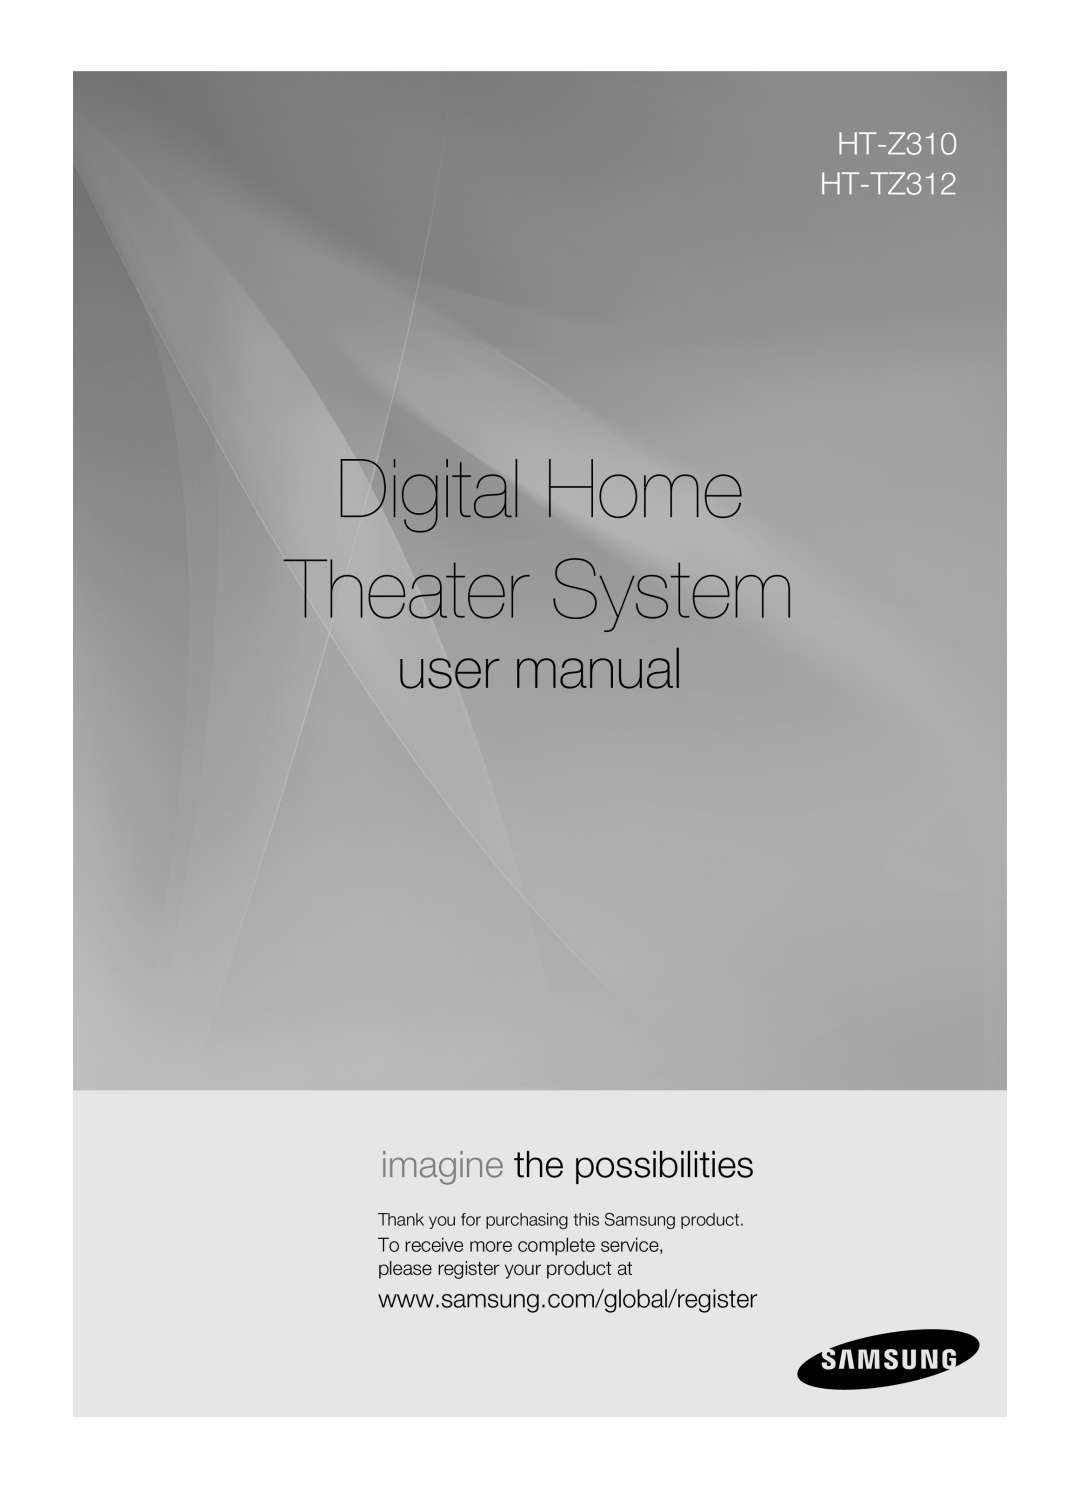 Samsung manual Digital Home Theater System, imagine the possibilities, HT-Z310 HT-TZ312 